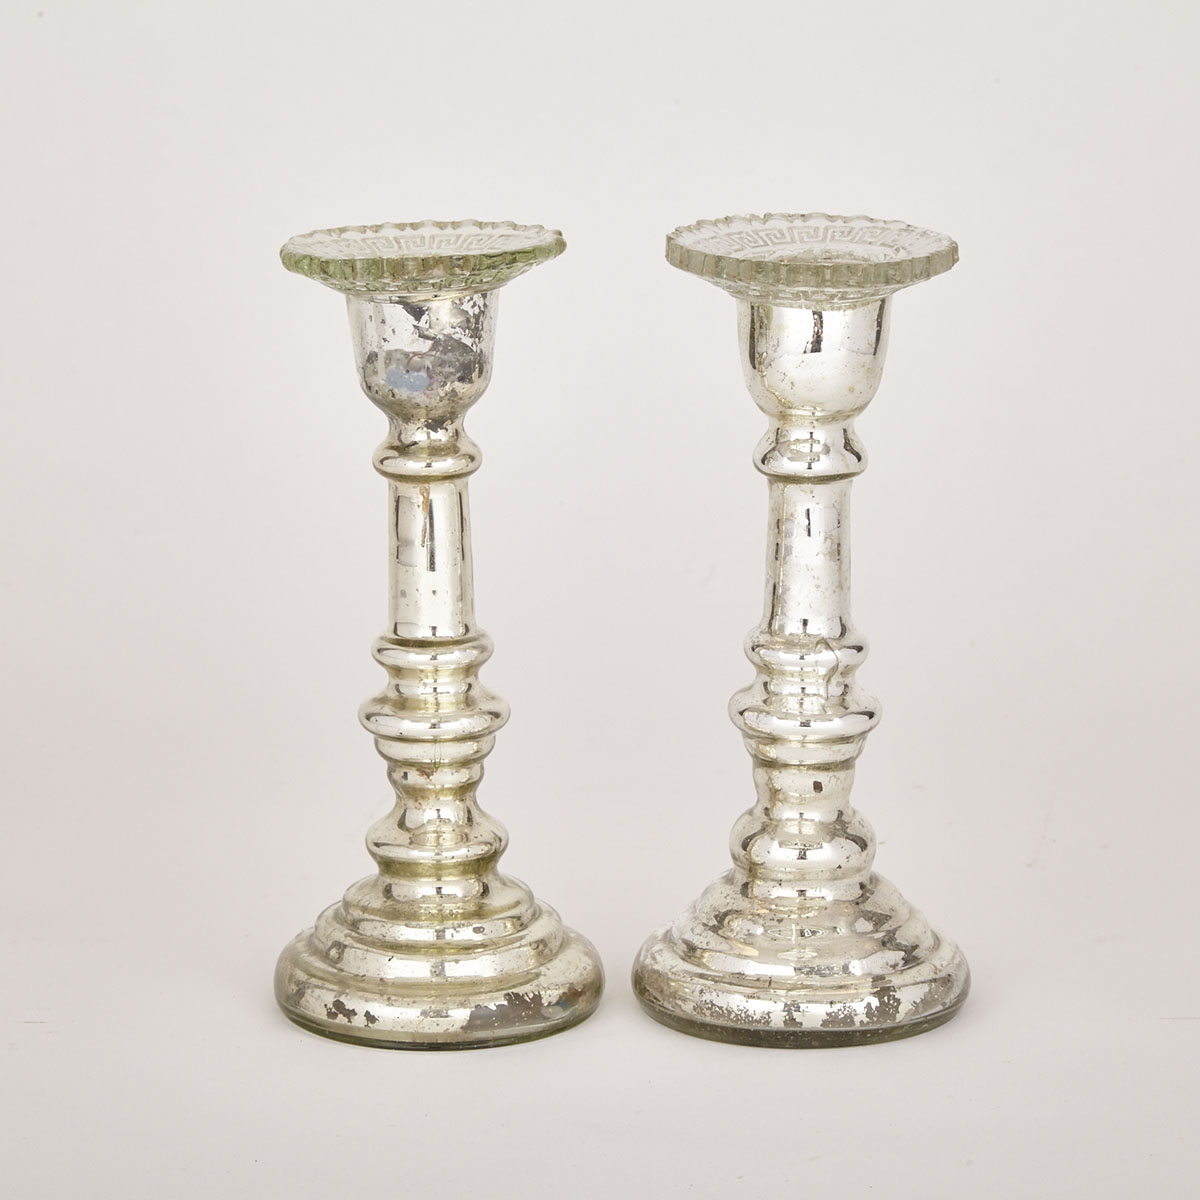 Pair of Canadian Napanee Glass House Mercury Glass Candlesticks, 19th century